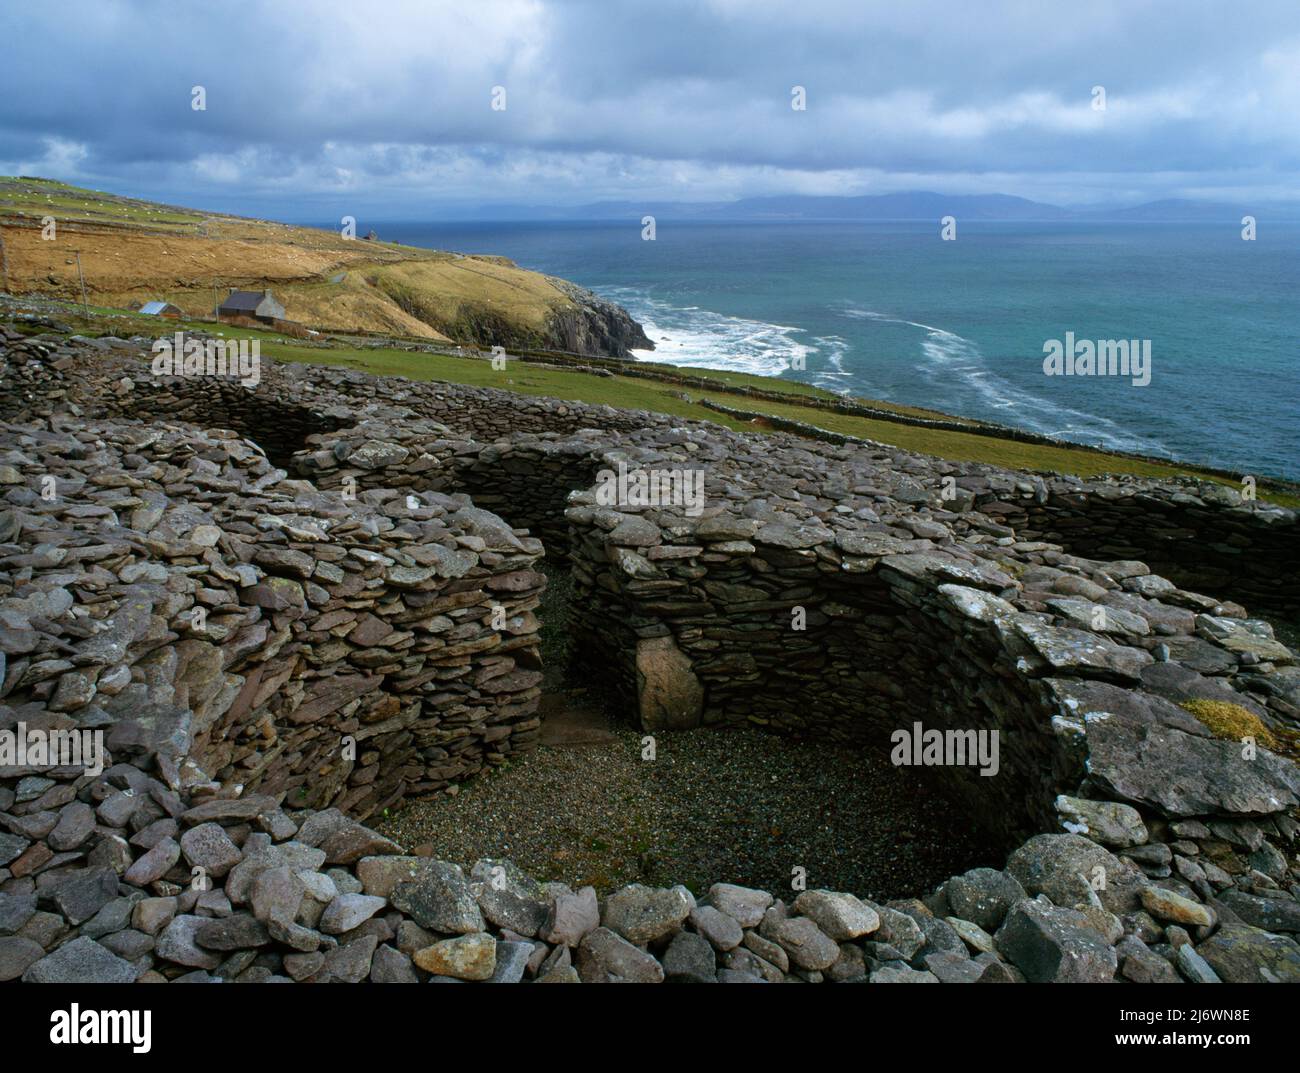 View SE of Caher Murphy Early Medieval cashel, Glanfahan, Dingle, County Kerry, Republic of Ireland, showing conjoined clochans (beehive dwellings). Stock Photo